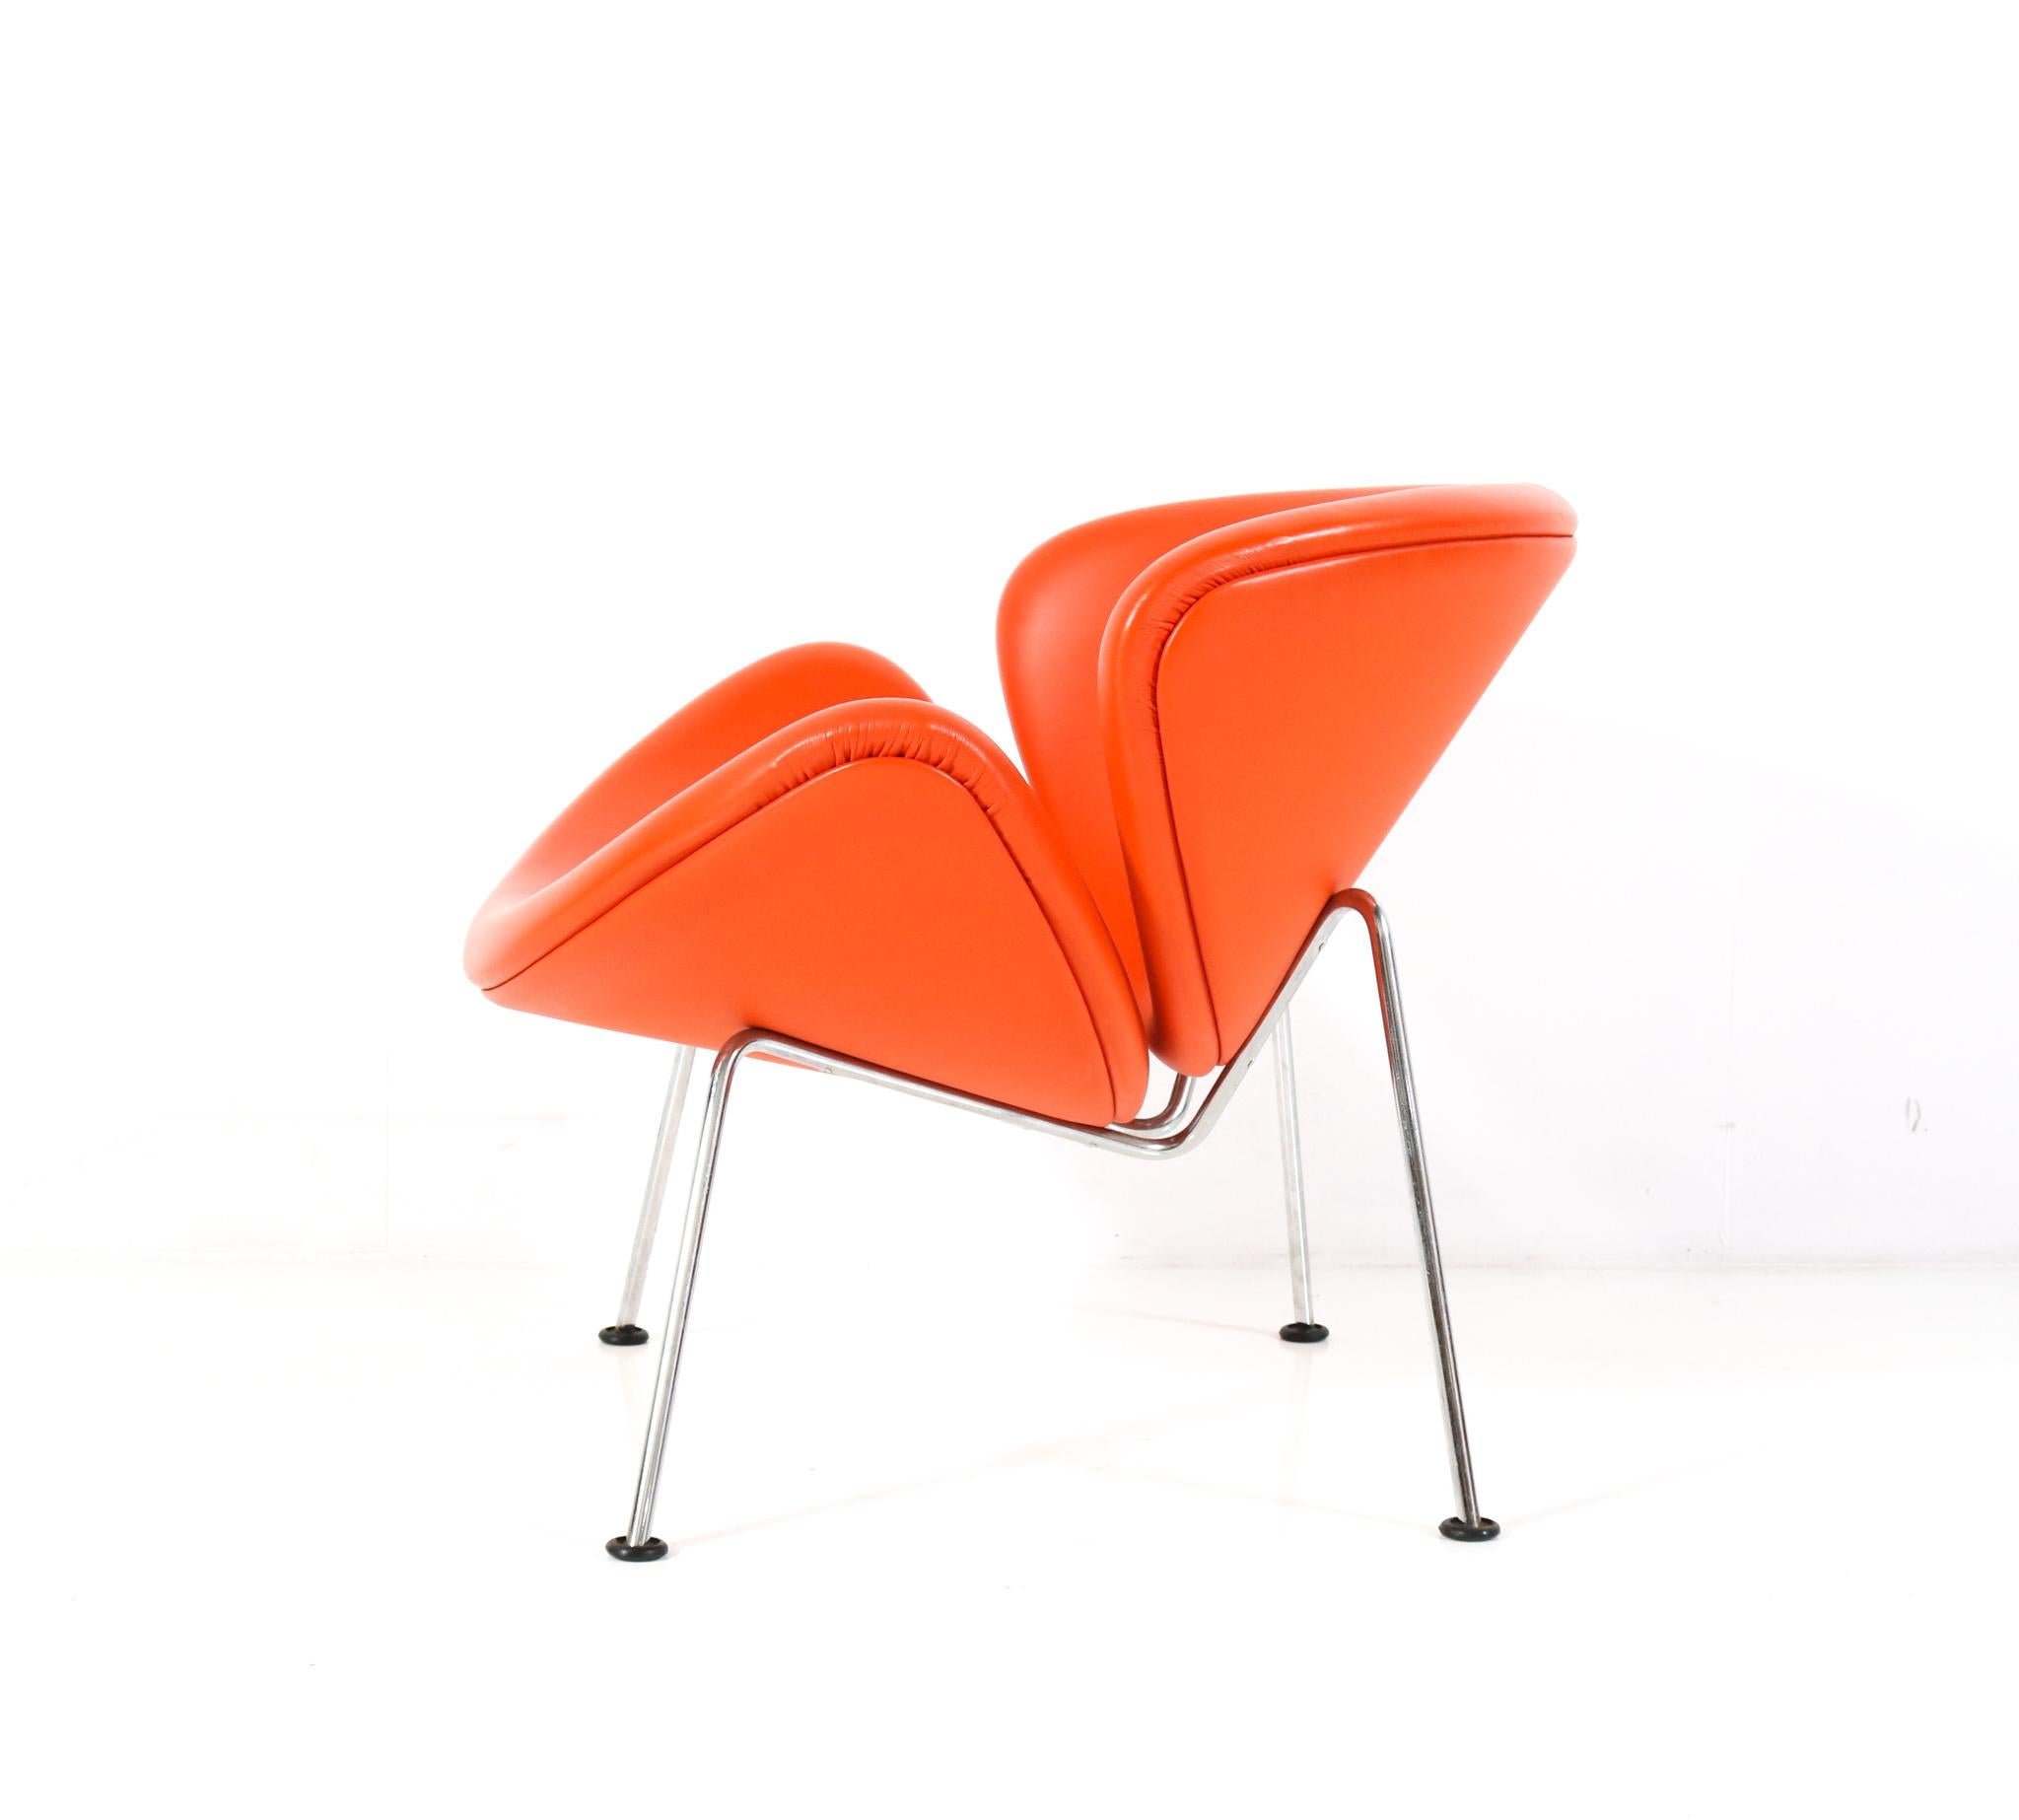 Late 20th Century Orange Leather Orange Slice Lounge Chair by Pierre Paulin for Artifort, 1990s